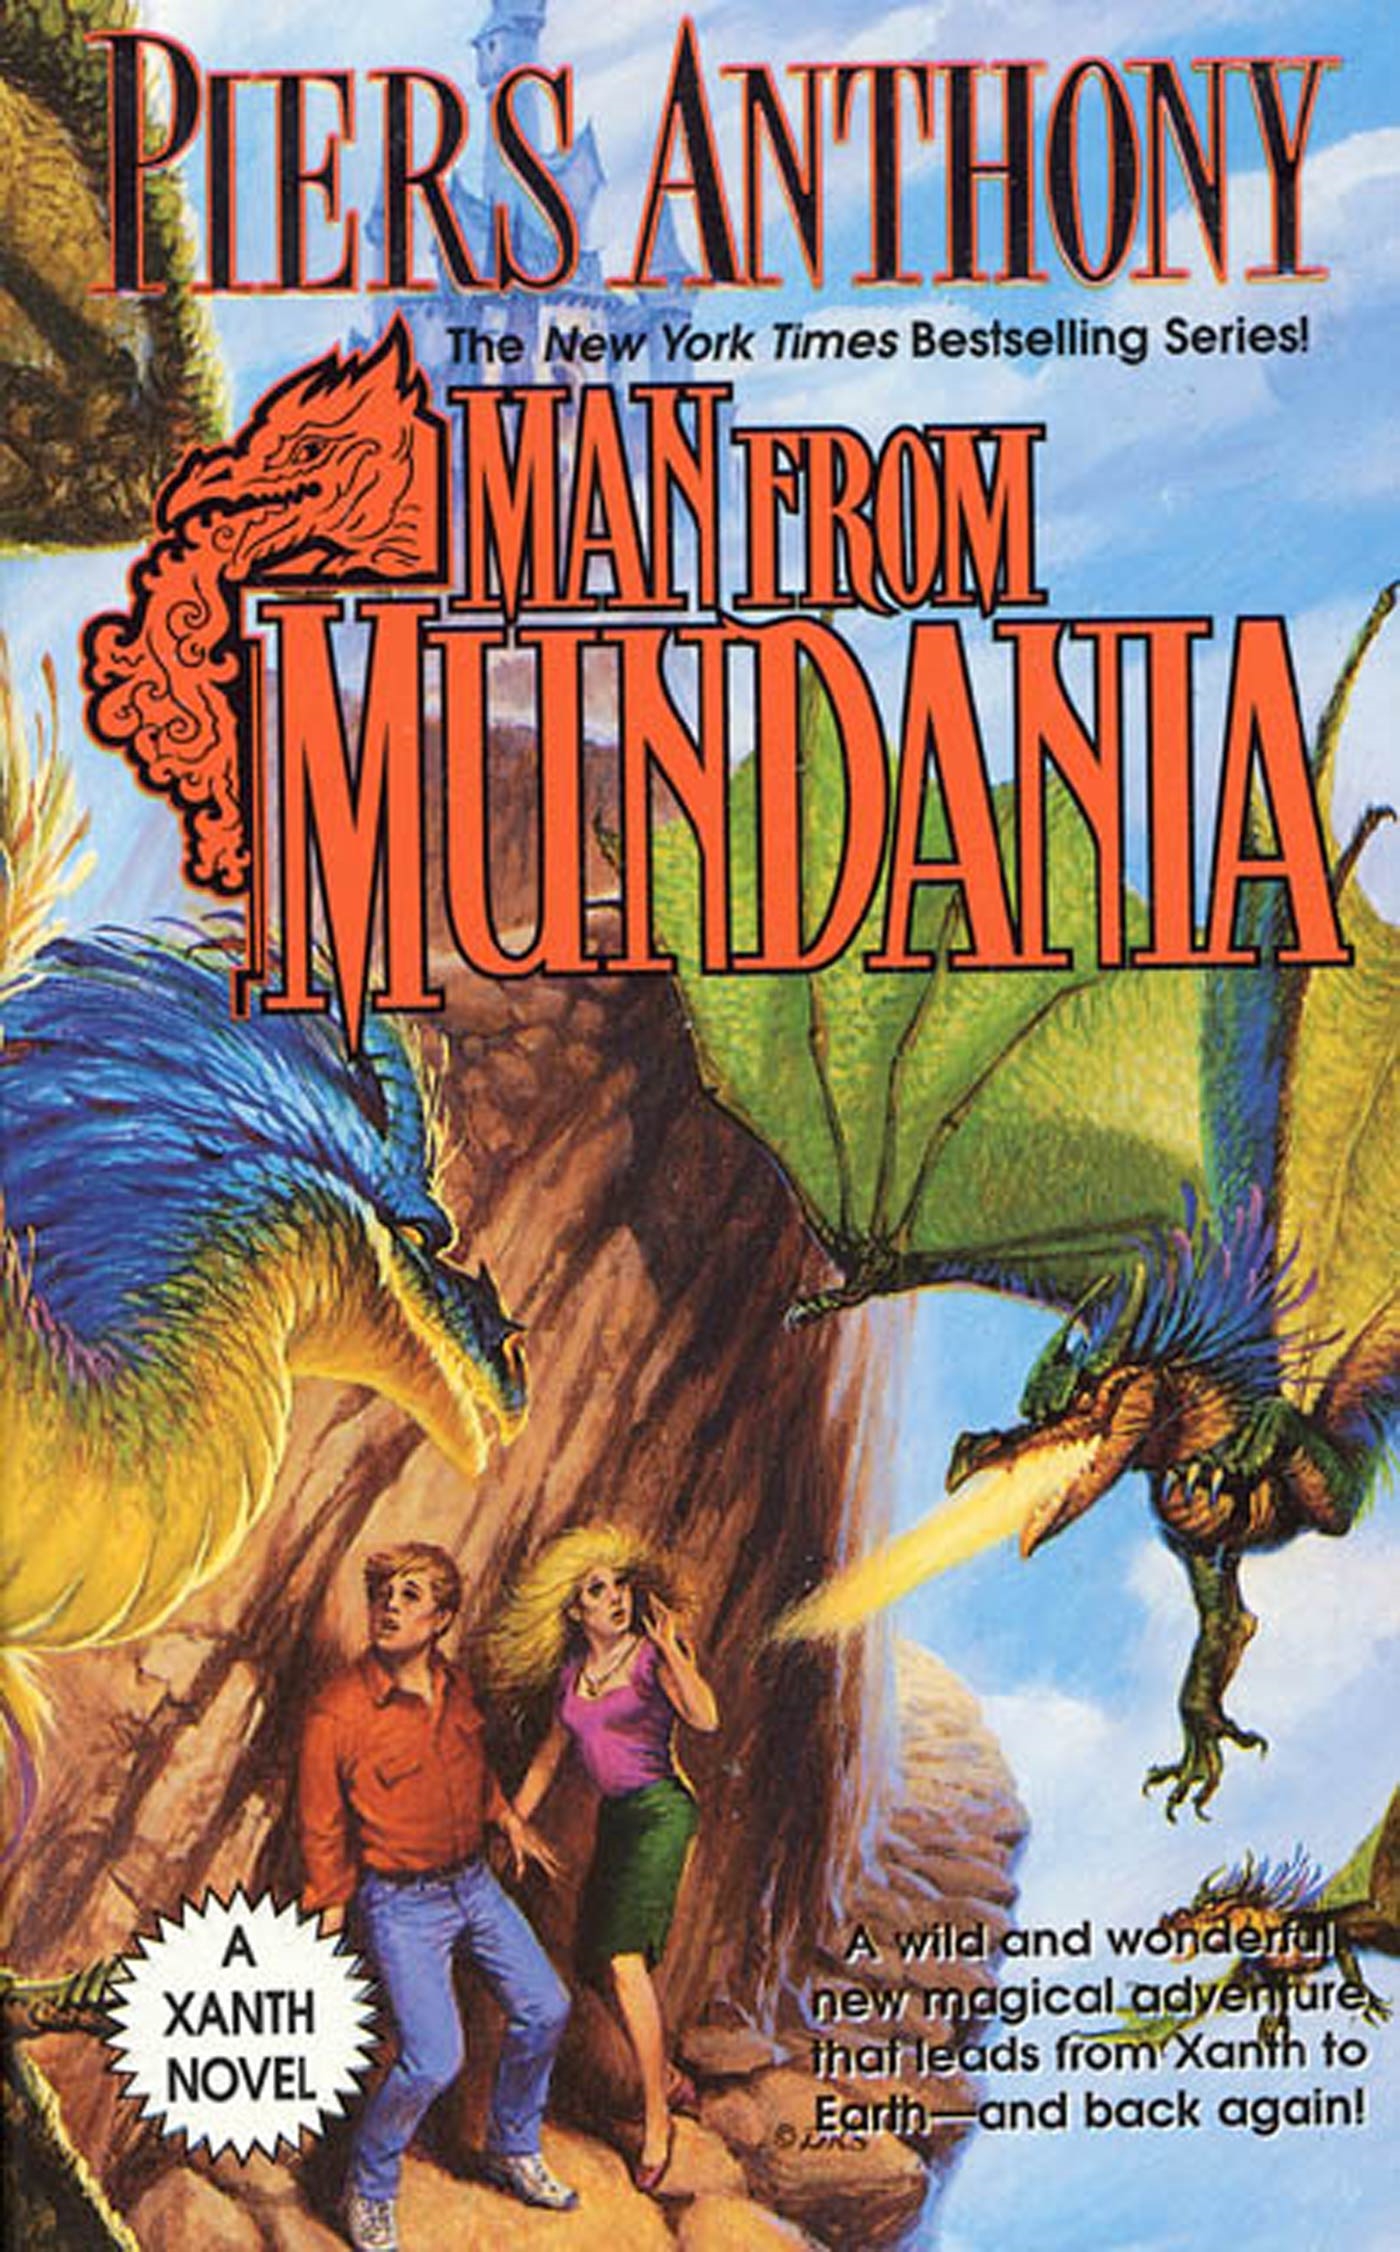 Man from Mundania by Piers Anthony